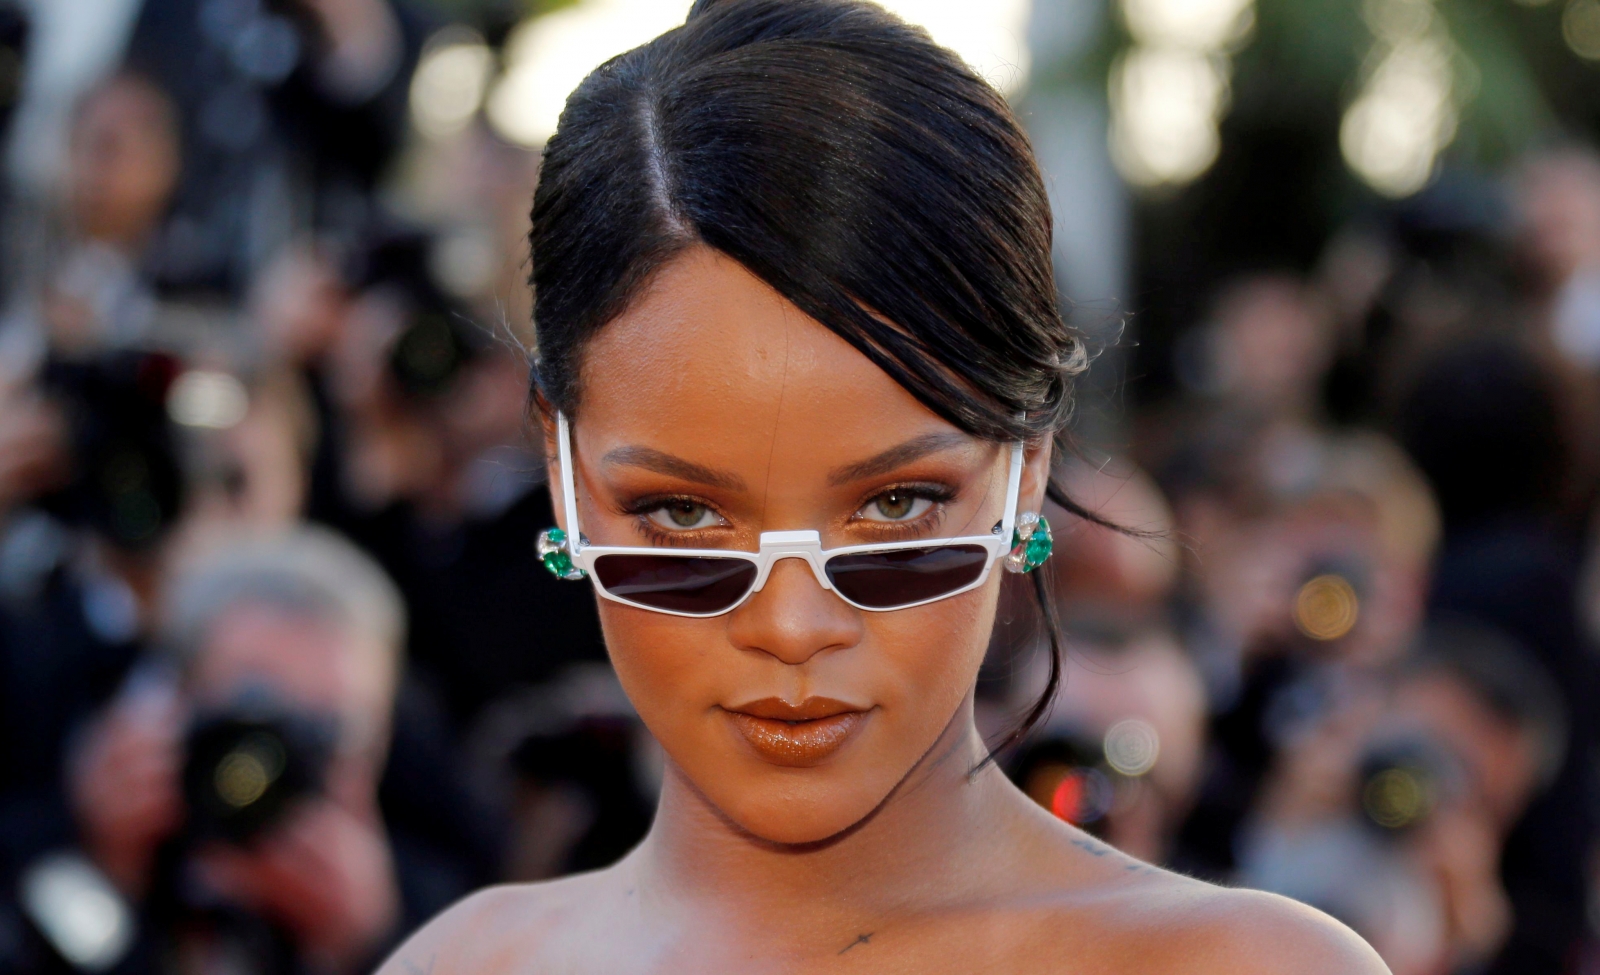 Rihanna relationship rumours sparked after she is seen with new man in Spain1600 x 975